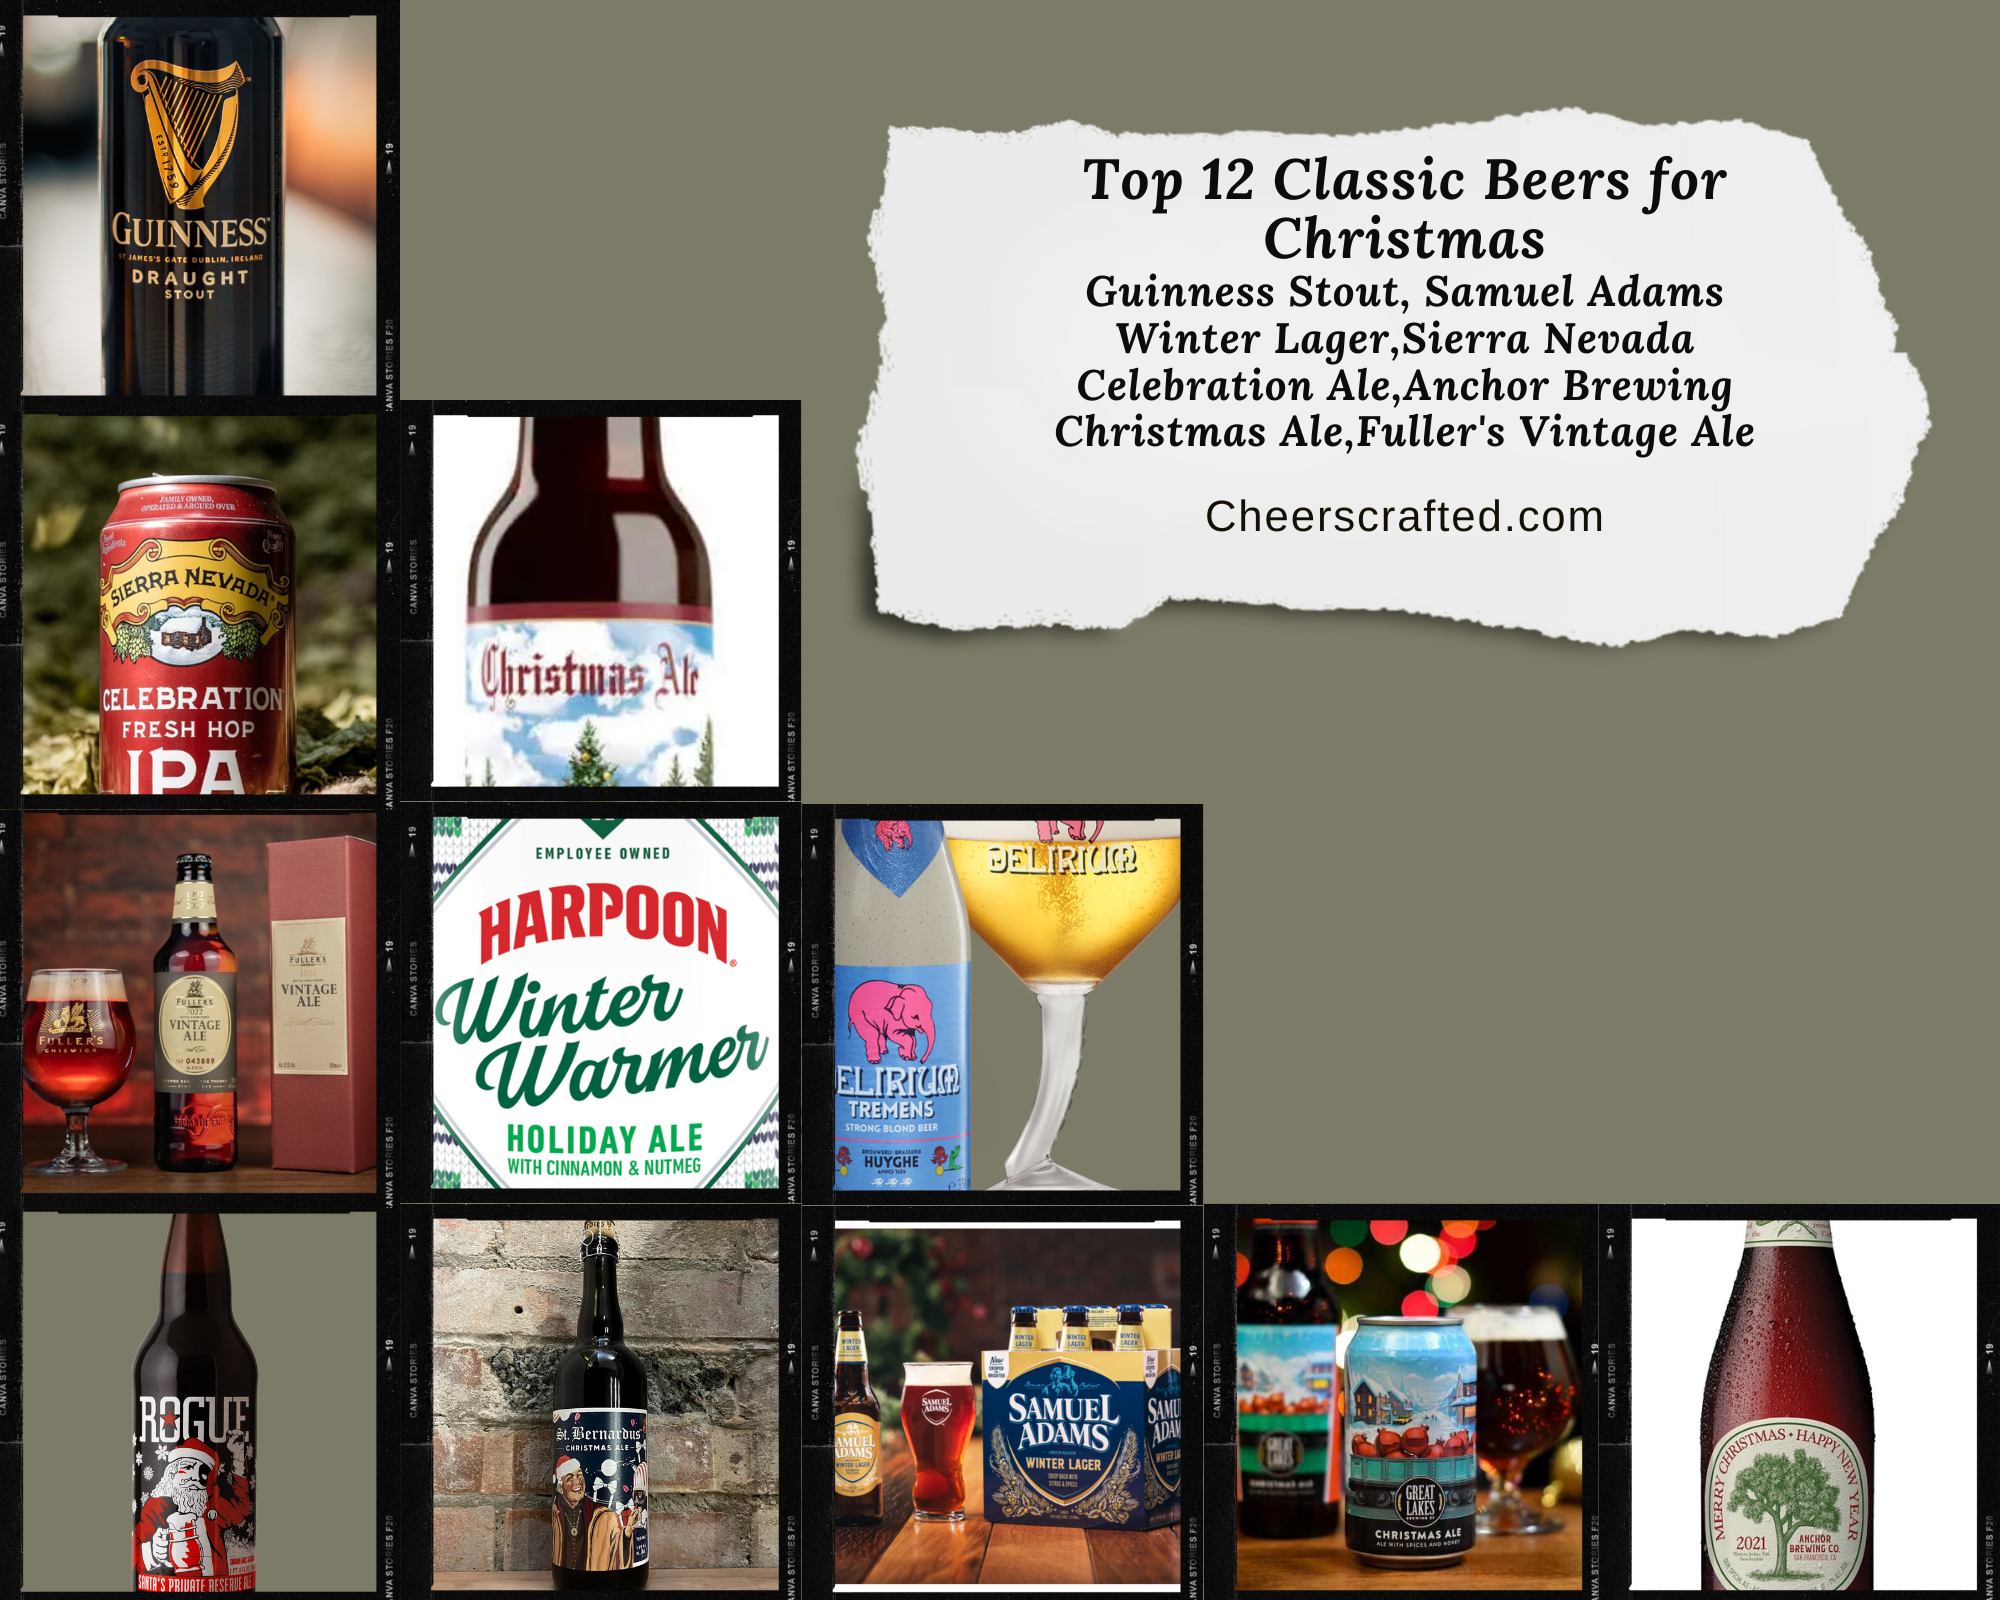 Top 12 Classic Beers for Christmas